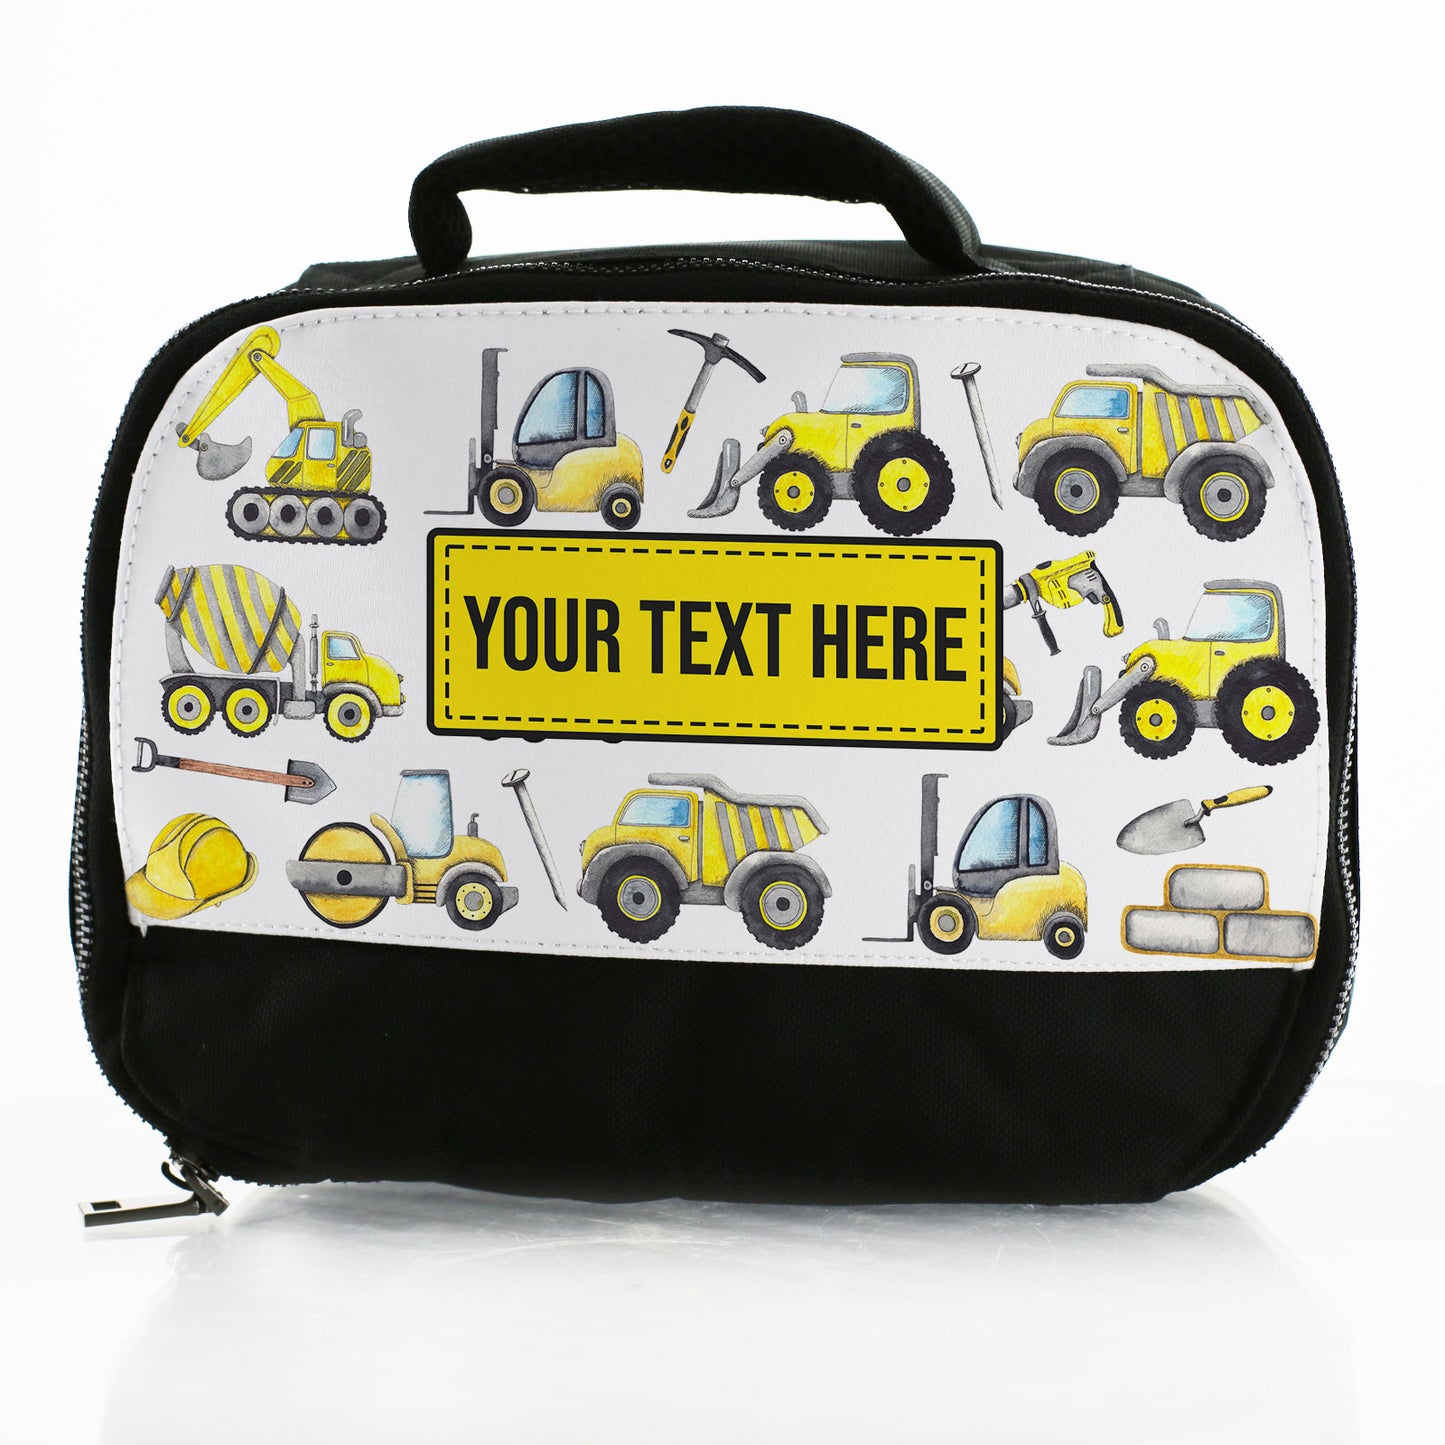 Personalised Lunch Bag with Diggers & Trucks & Name